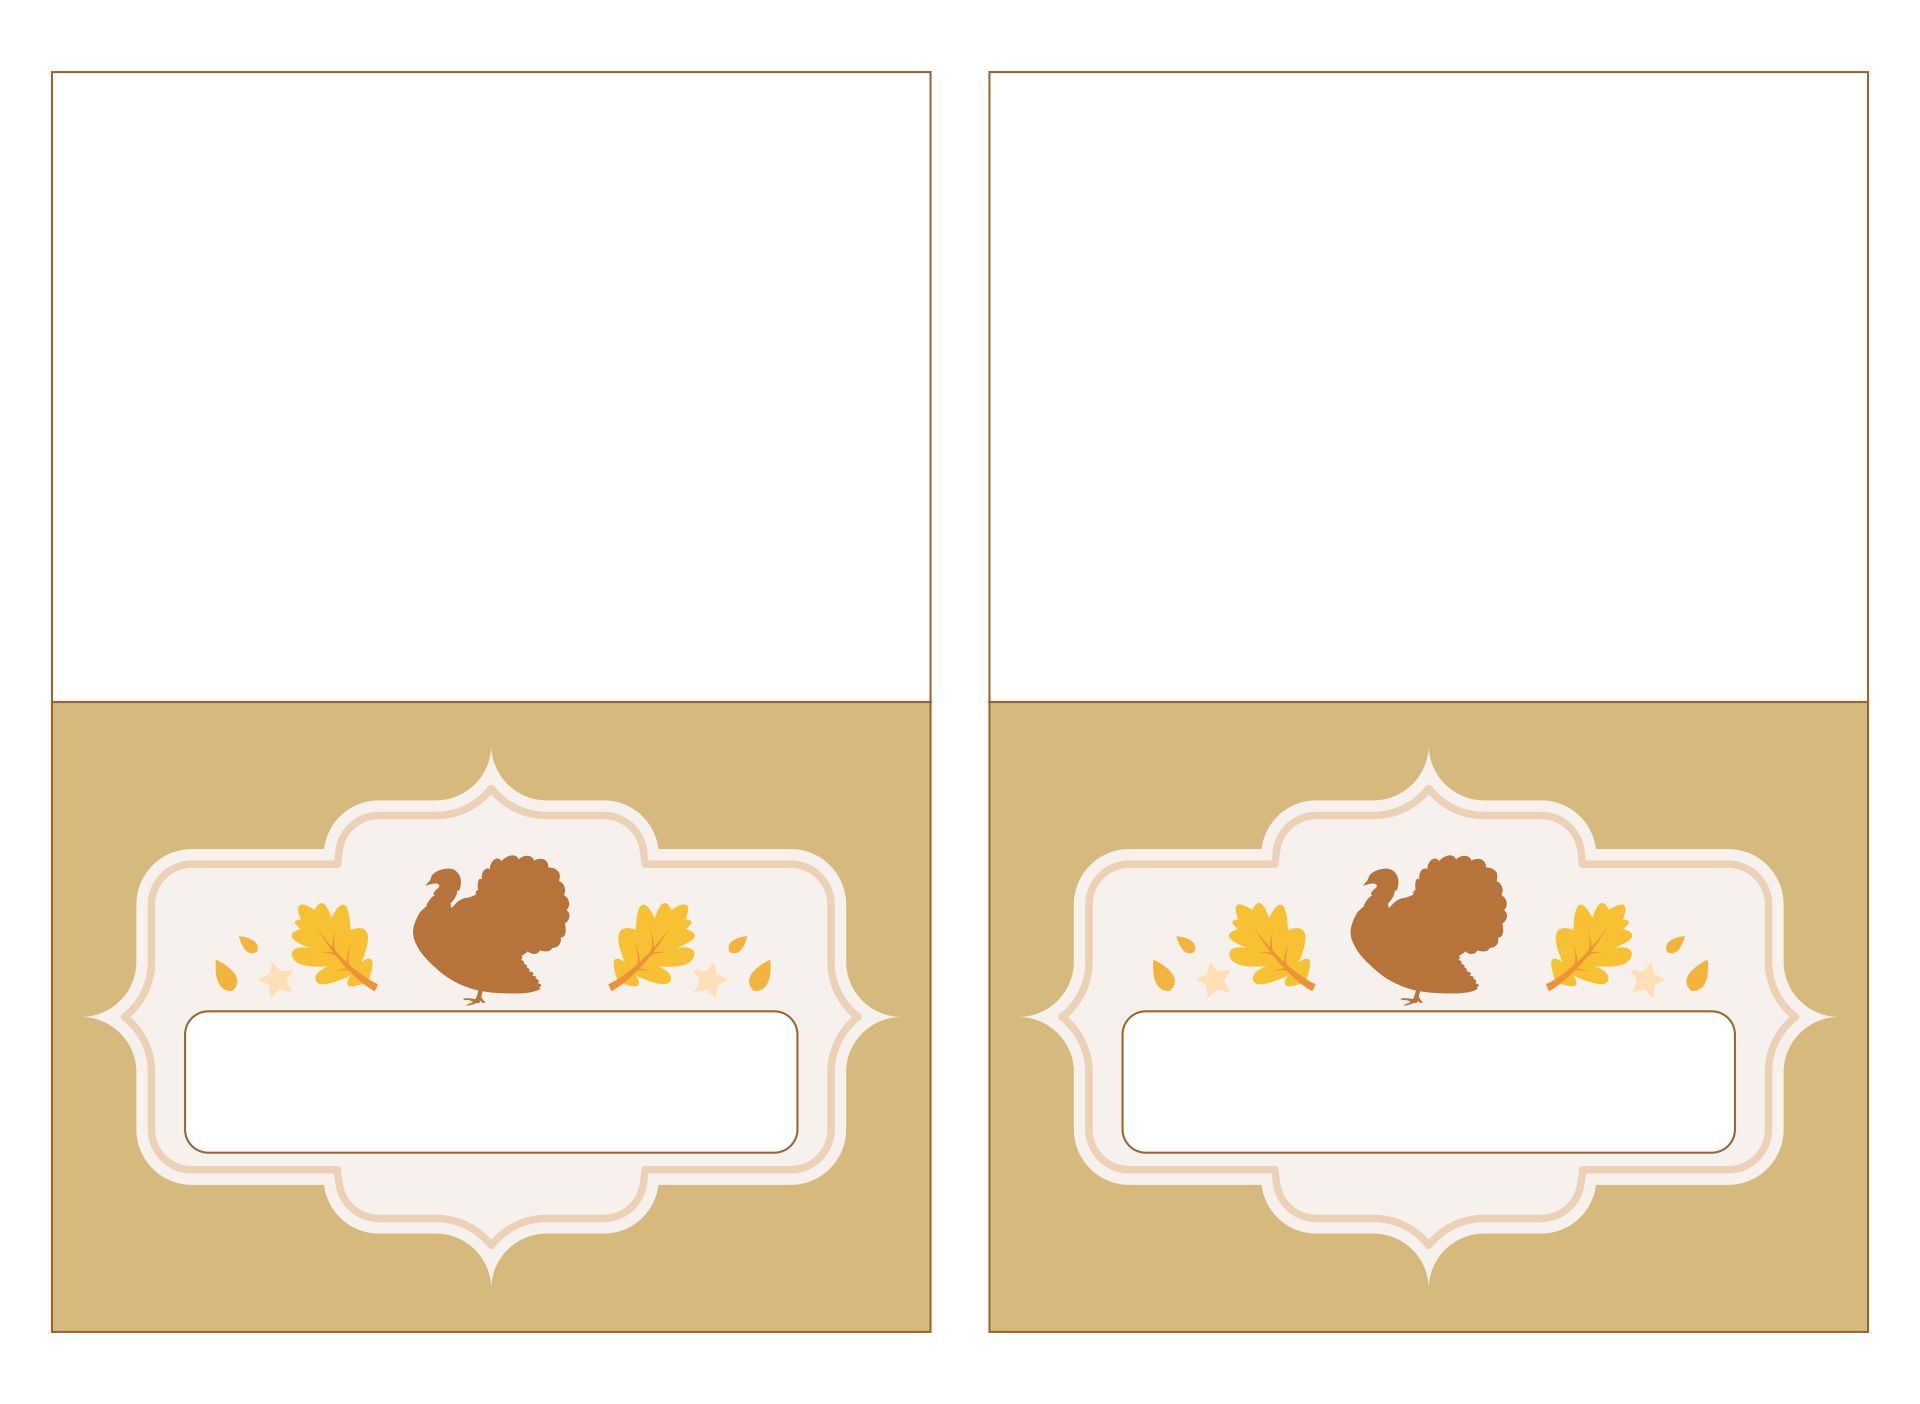 Printable Thanksgiving Placecards